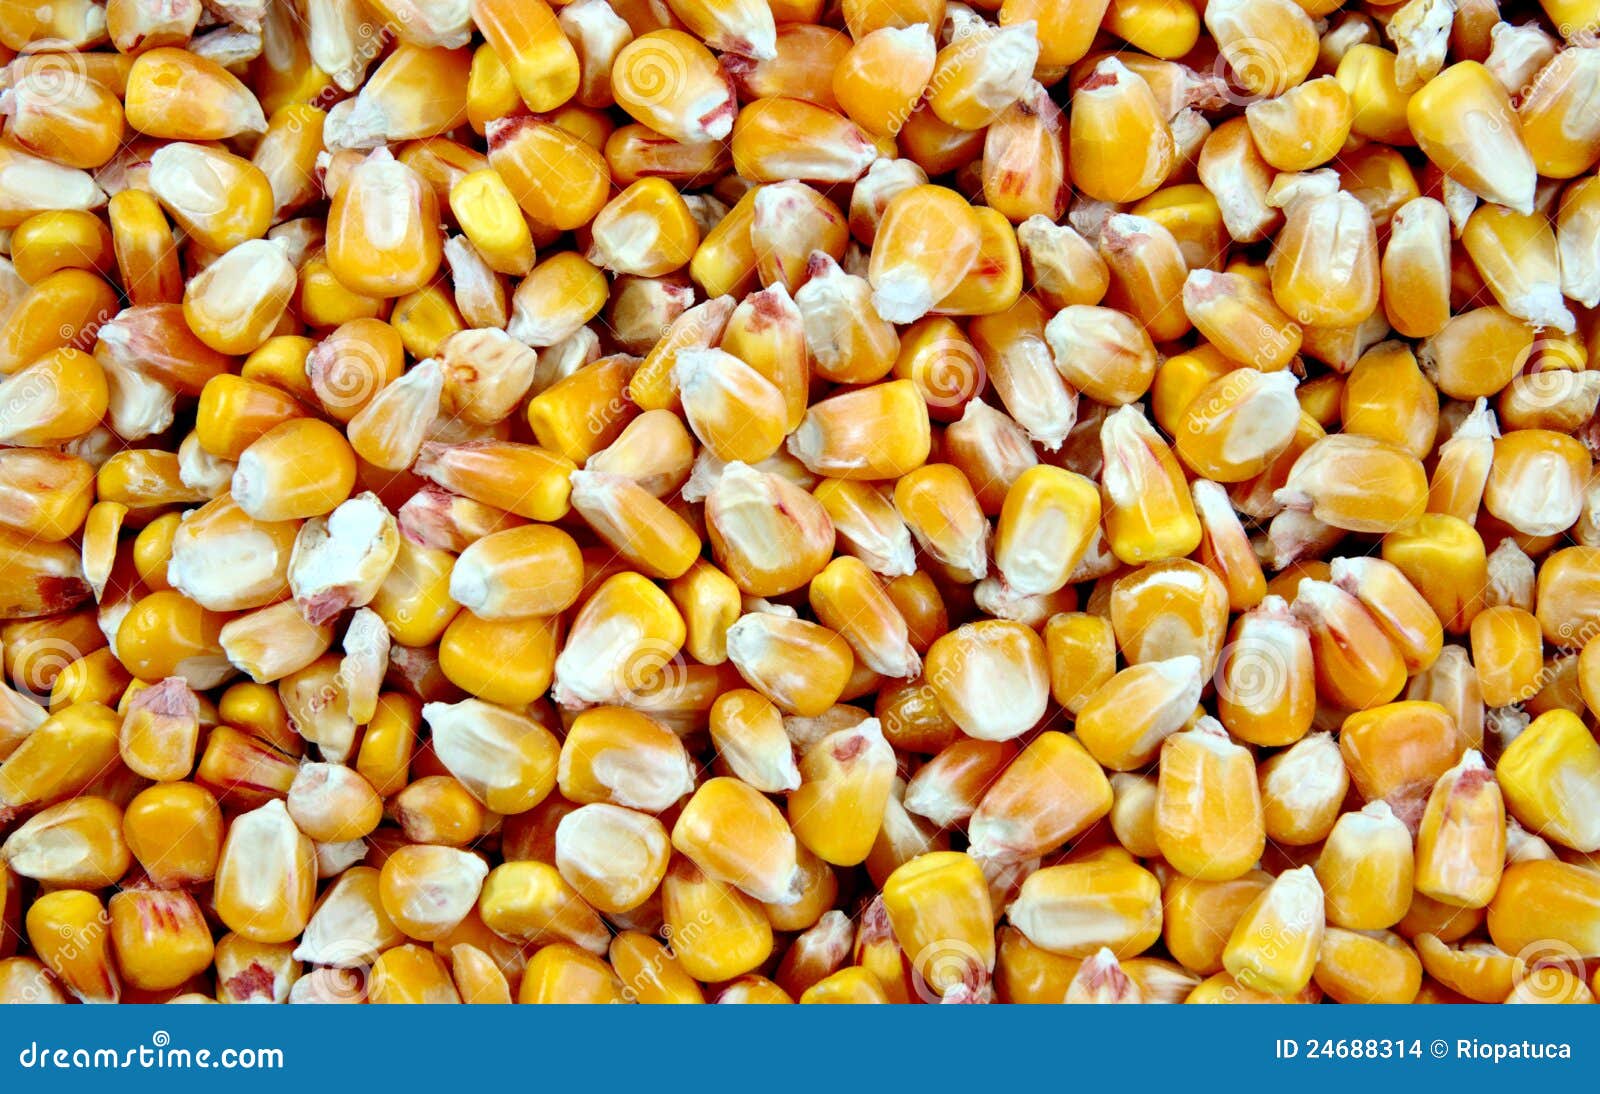 Mais grain stock photo. Image of feed, frame, format - 24688314